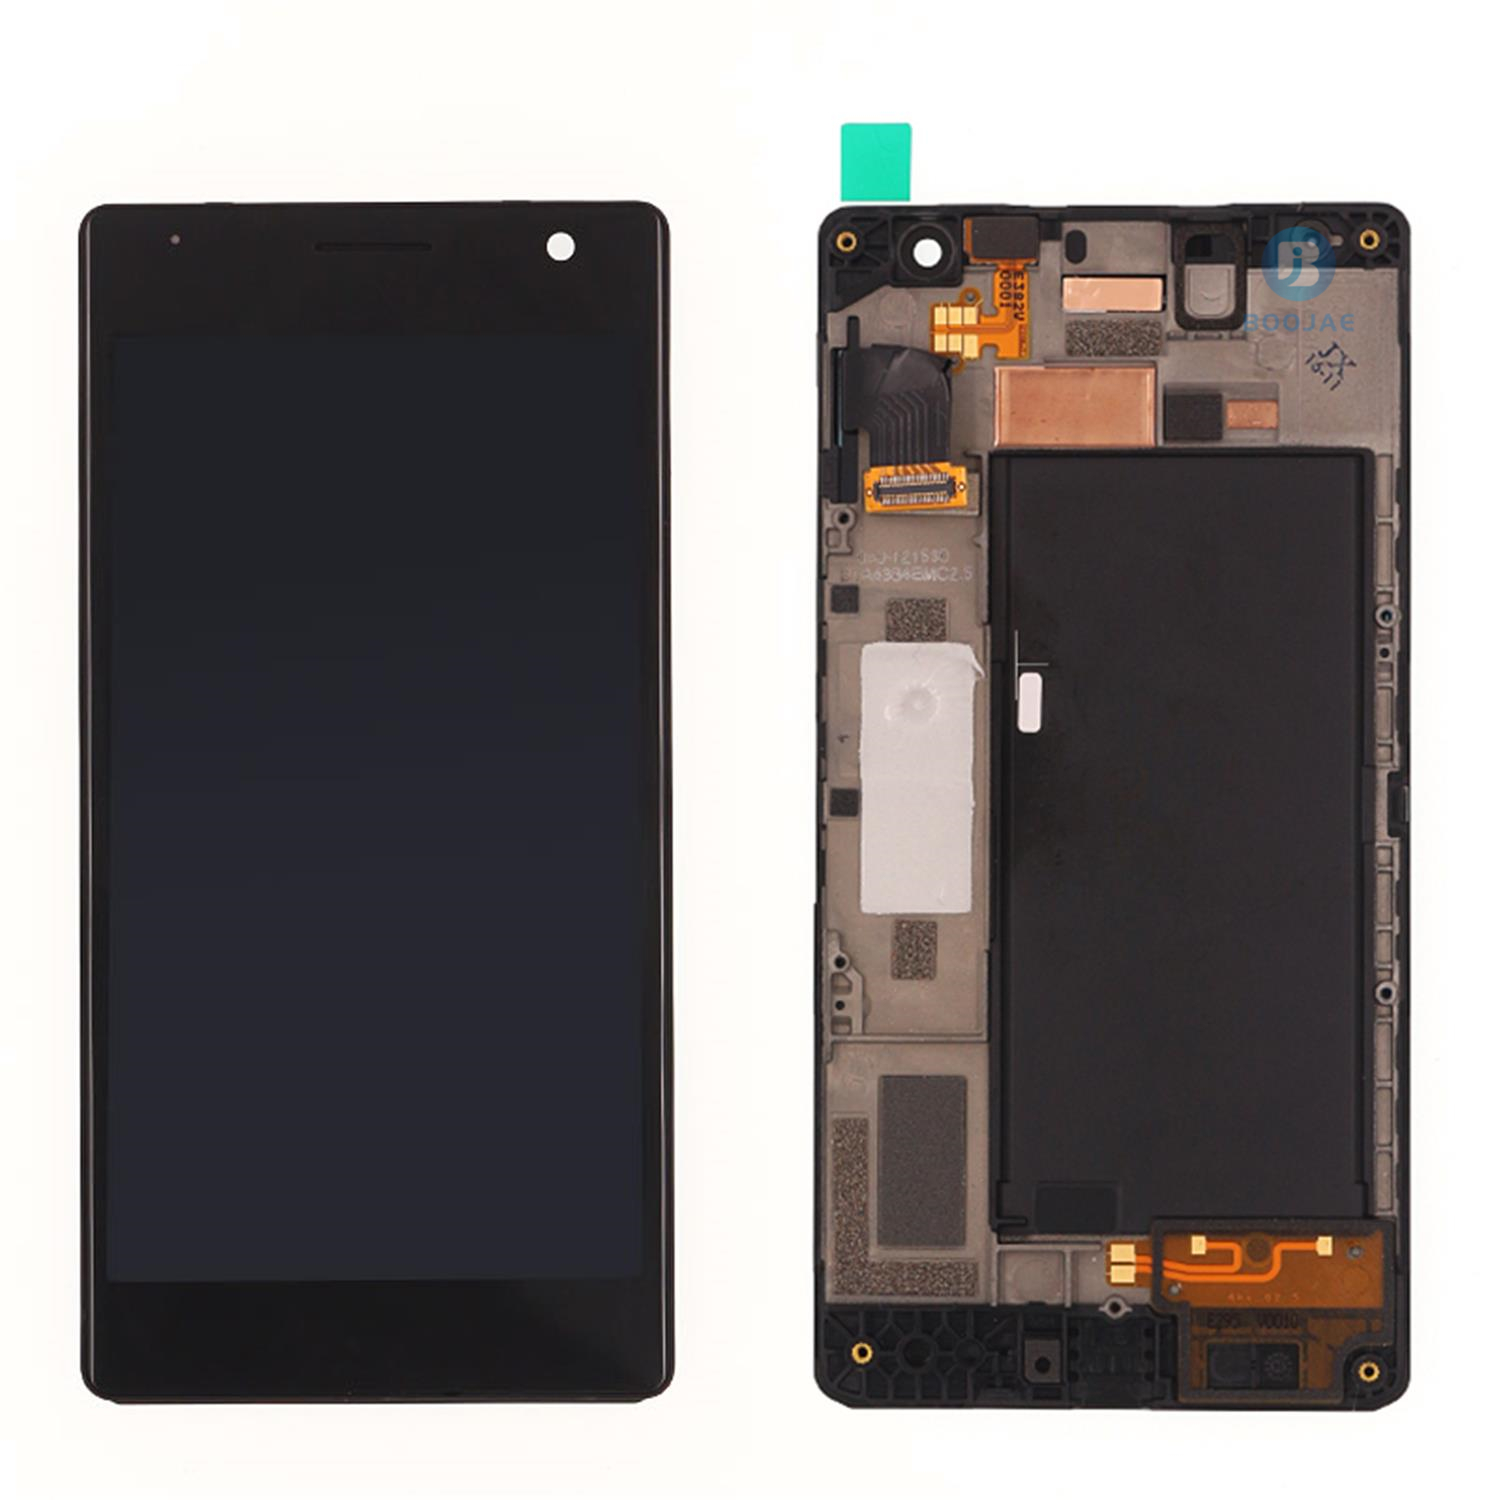 For Nokia Lumia 730 LCD Screen Display and Touch Panel Digitizer Assembly Replacement